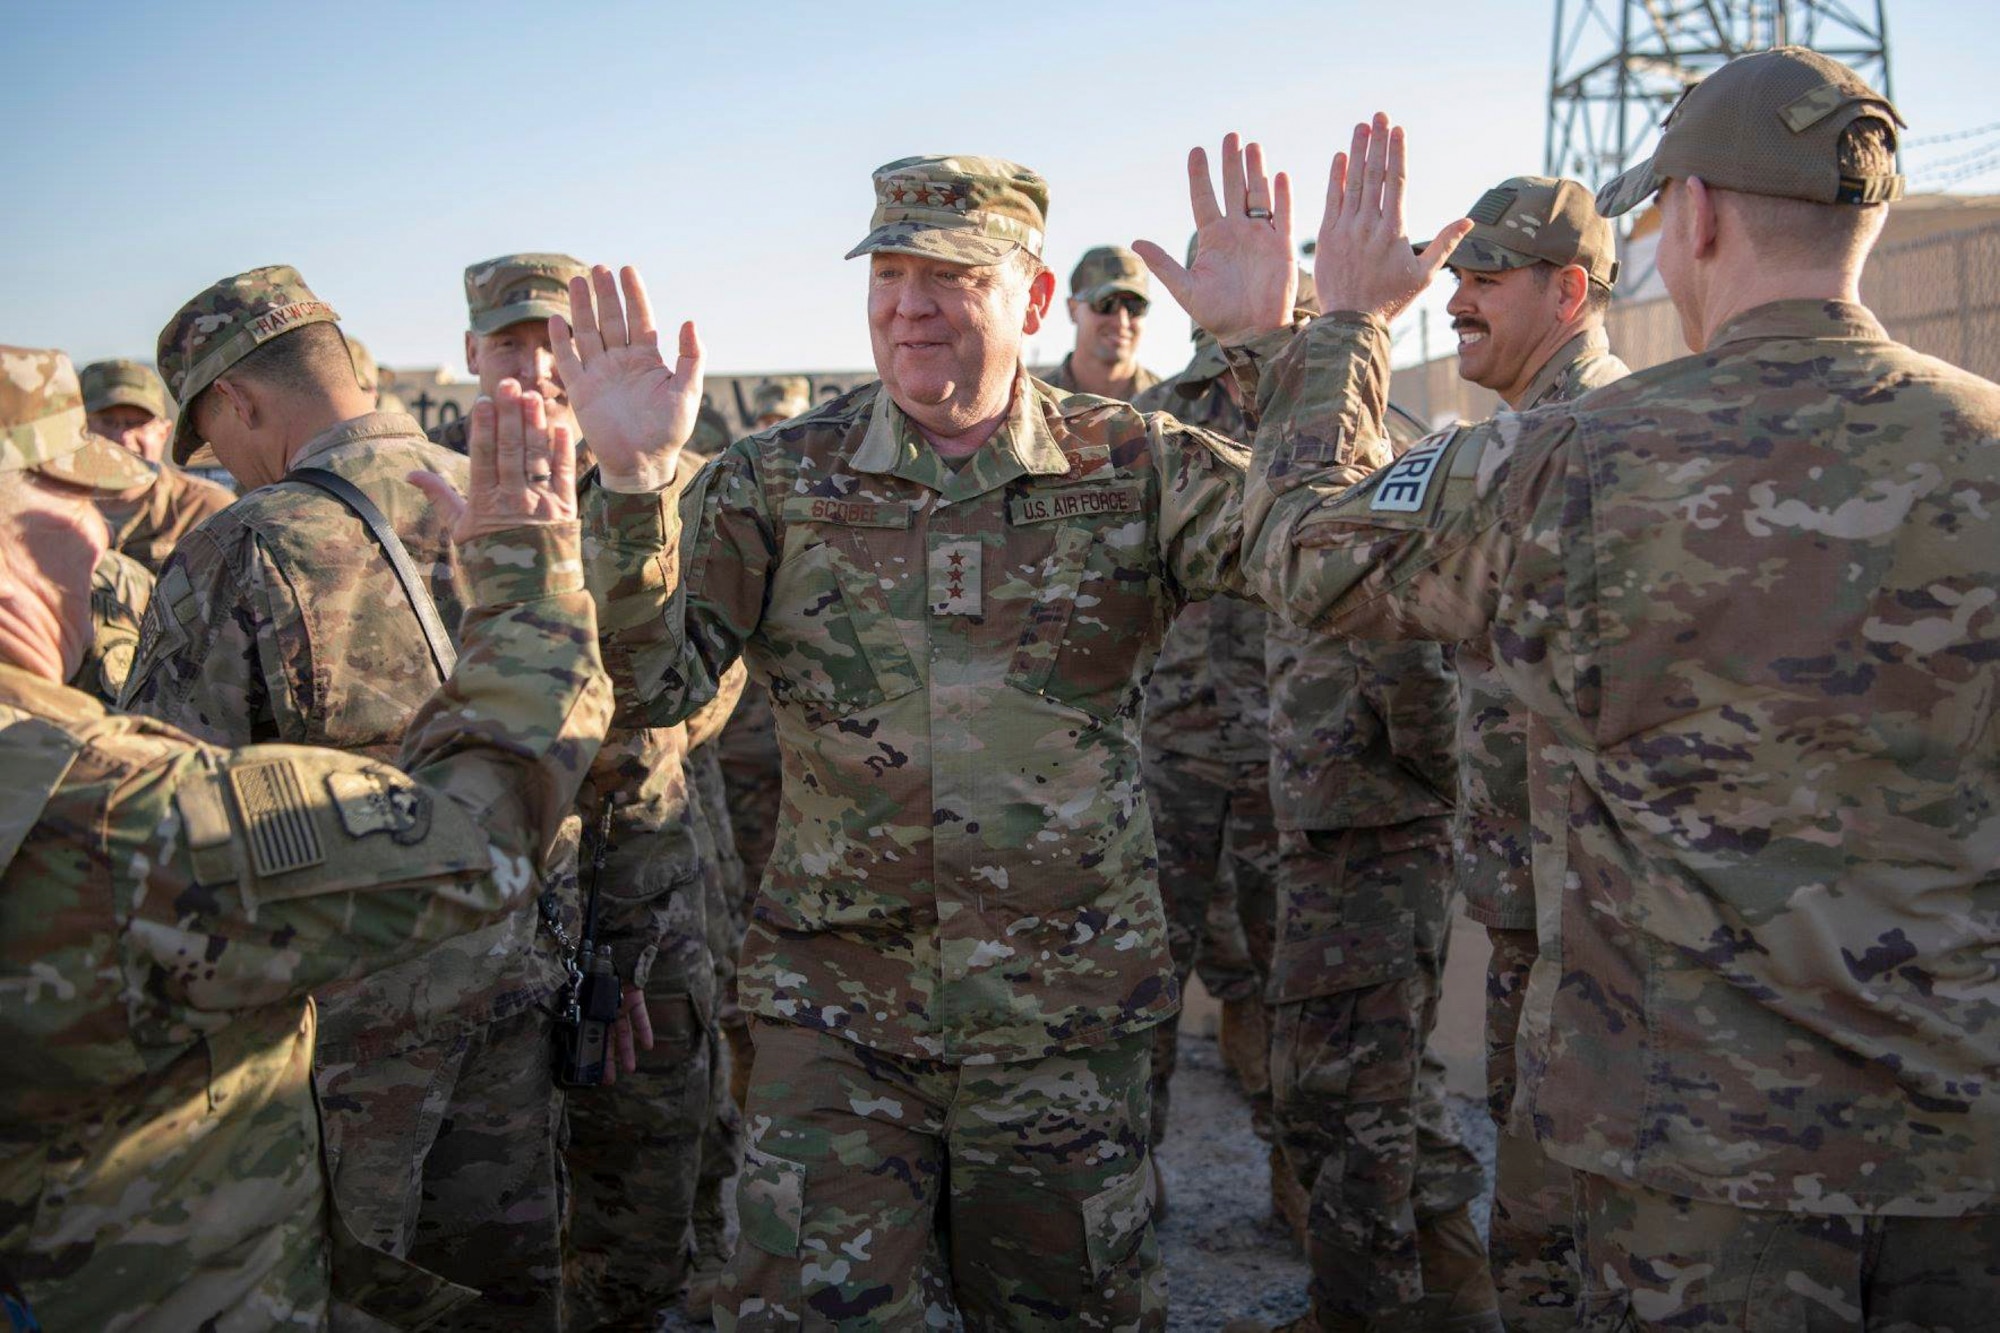 Lt. Gen. Richard W. Scobee, Commander, Air Force Reserve Command, high-fives members of the 386th Expeditionary Civil Engineer Squadron during a visit to an undisclosed location in Southwest Asia, Feb. 12, 2019. (U.S. Air Force Photo by Tech. Sgt. Robert Cloys)